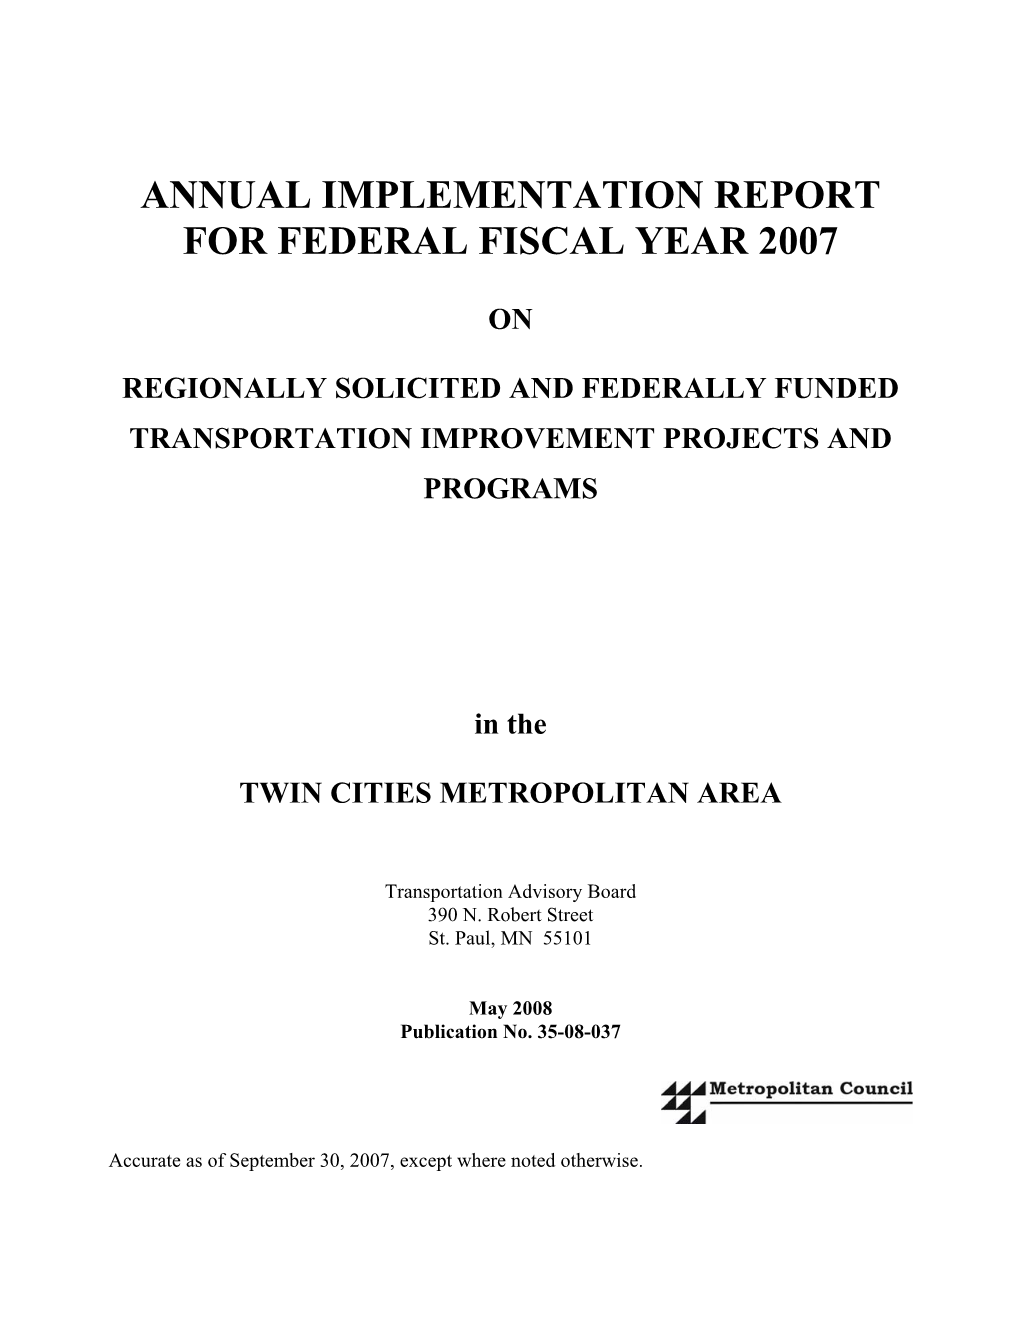 Annual Implementation Report for Federal Fiscal Year 2007 On